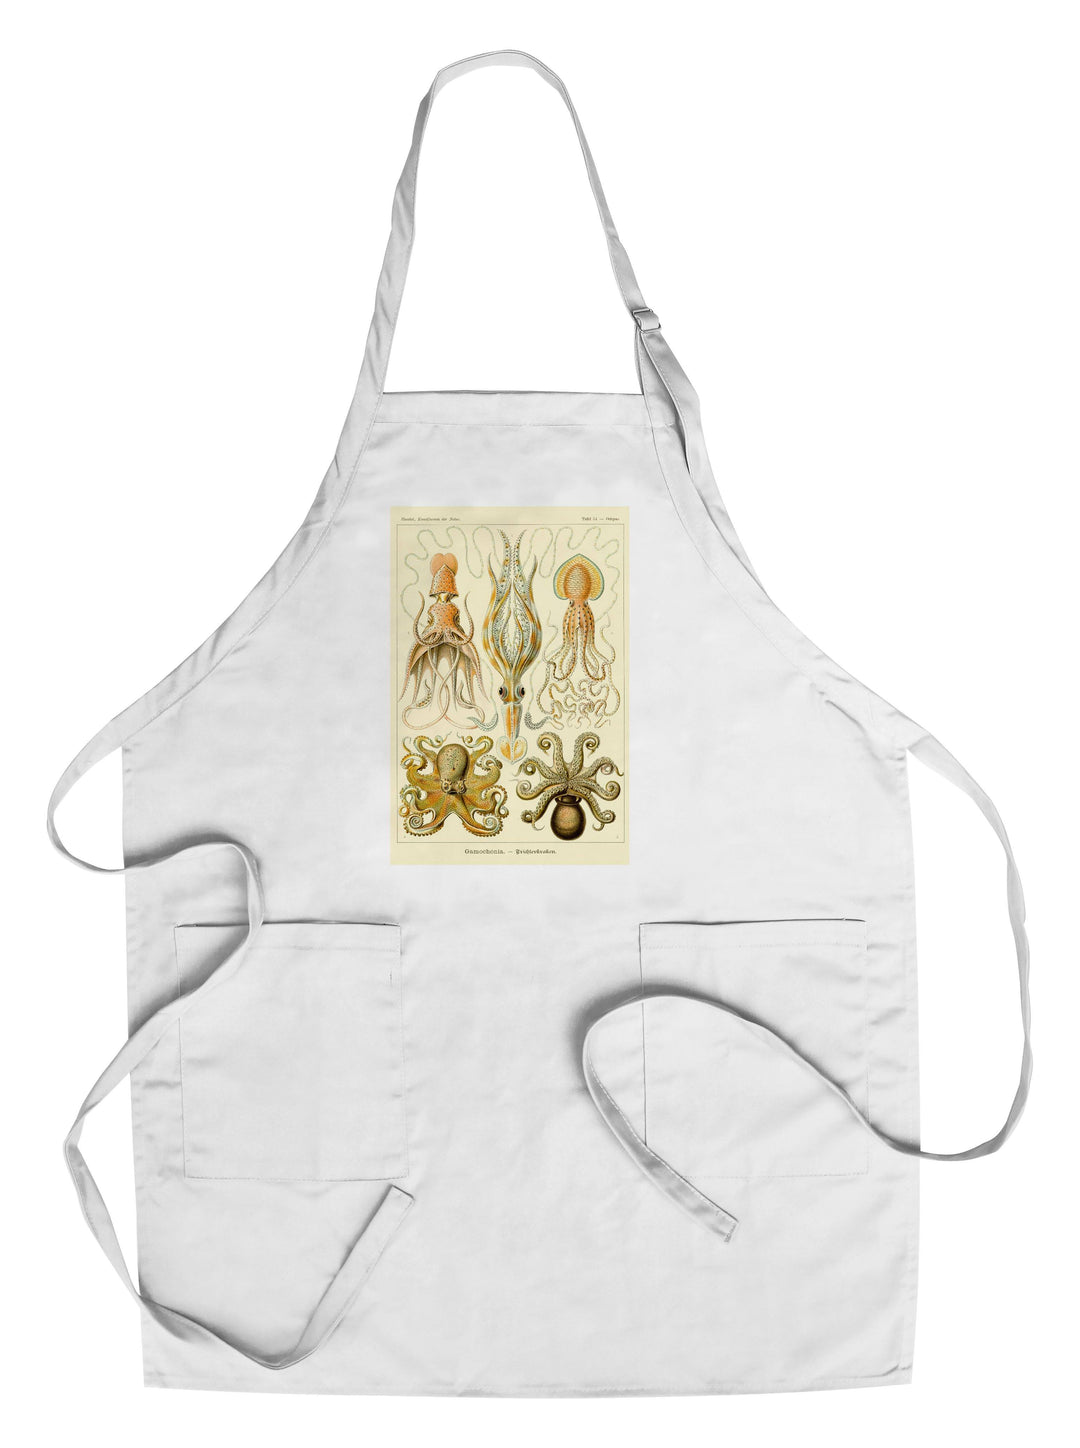 Art Forms of Nature, Gamochonia (Octopuses & Squids), Ernst Haeckel Artwork, Towels and Aprons Kitchen Lantern Press Chef's Apron 